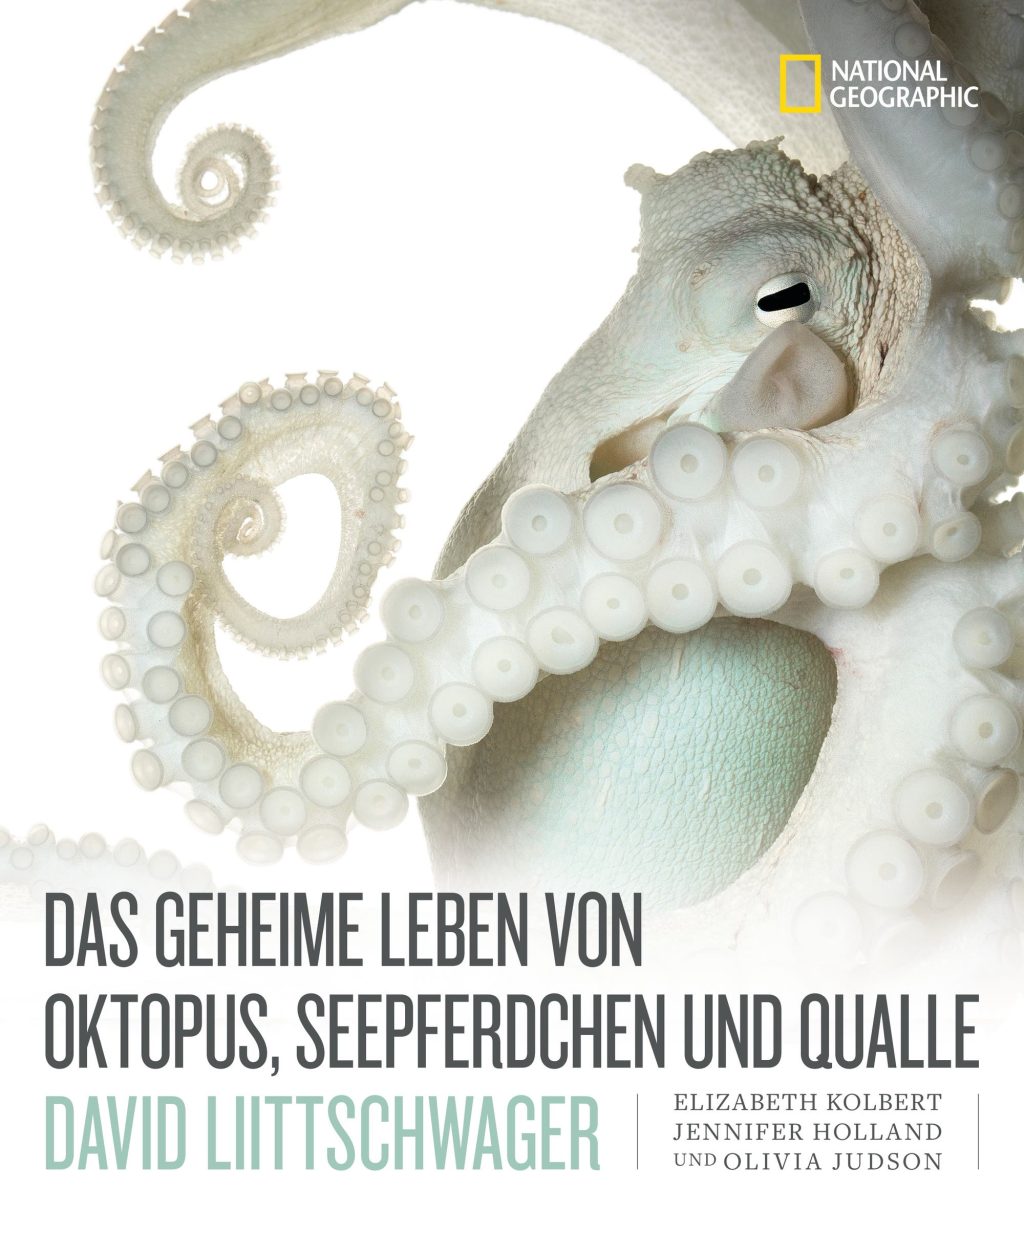 Review of the secret life of octopus, seahorses and jellyfish